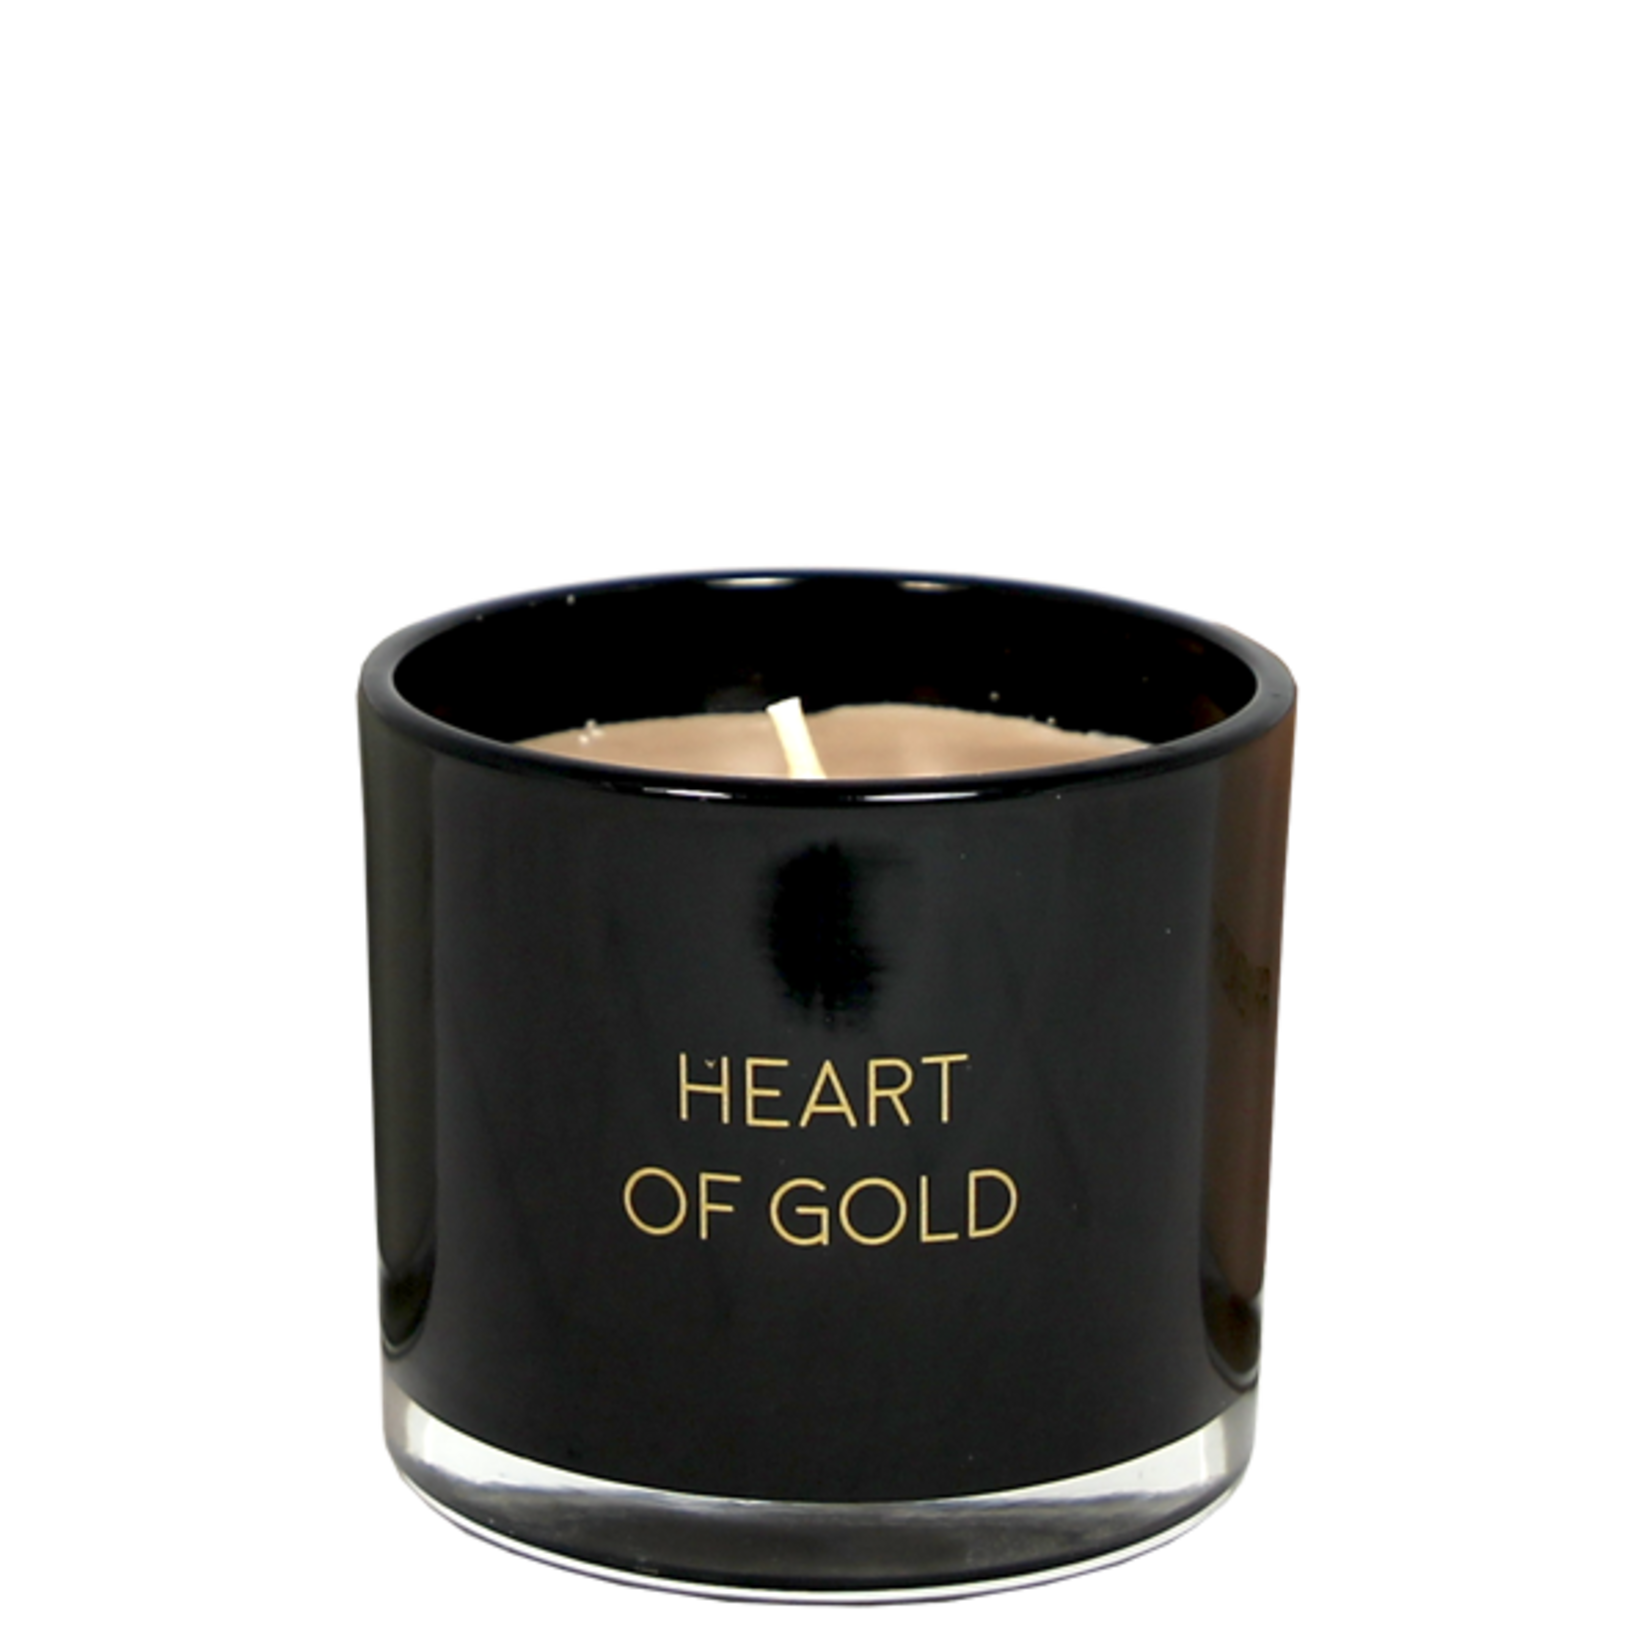 My Flame Geurkaars met wens armband - "Heart of gold" - Warm Cashmere